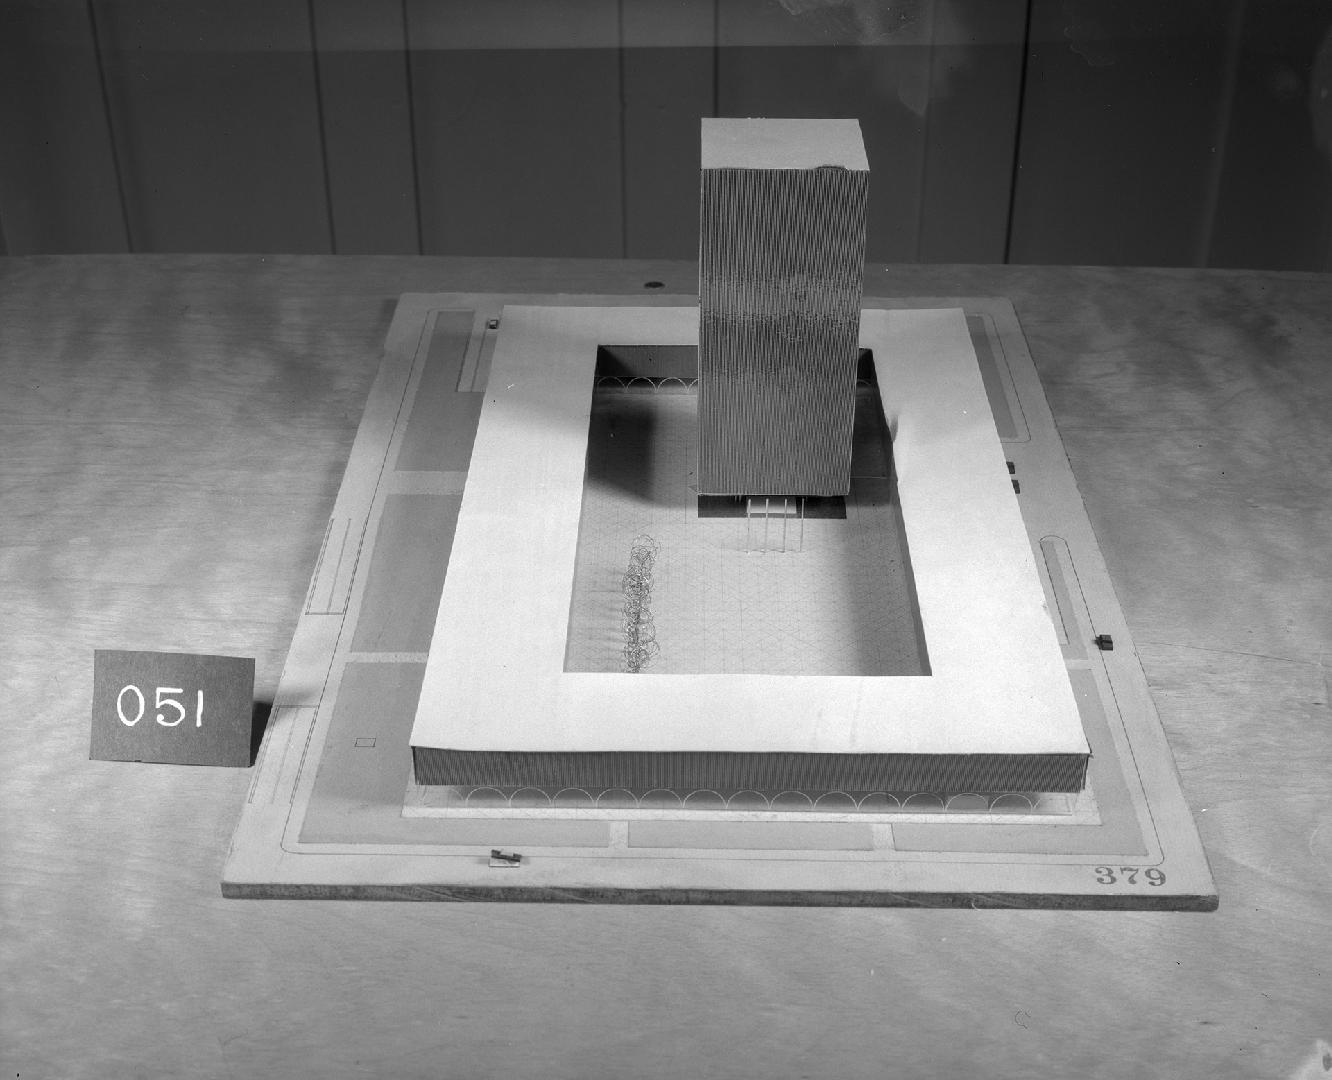 Bruce A. Abrahamson entry, City Hall and Square Competition, Toronto, 1958, architectural model